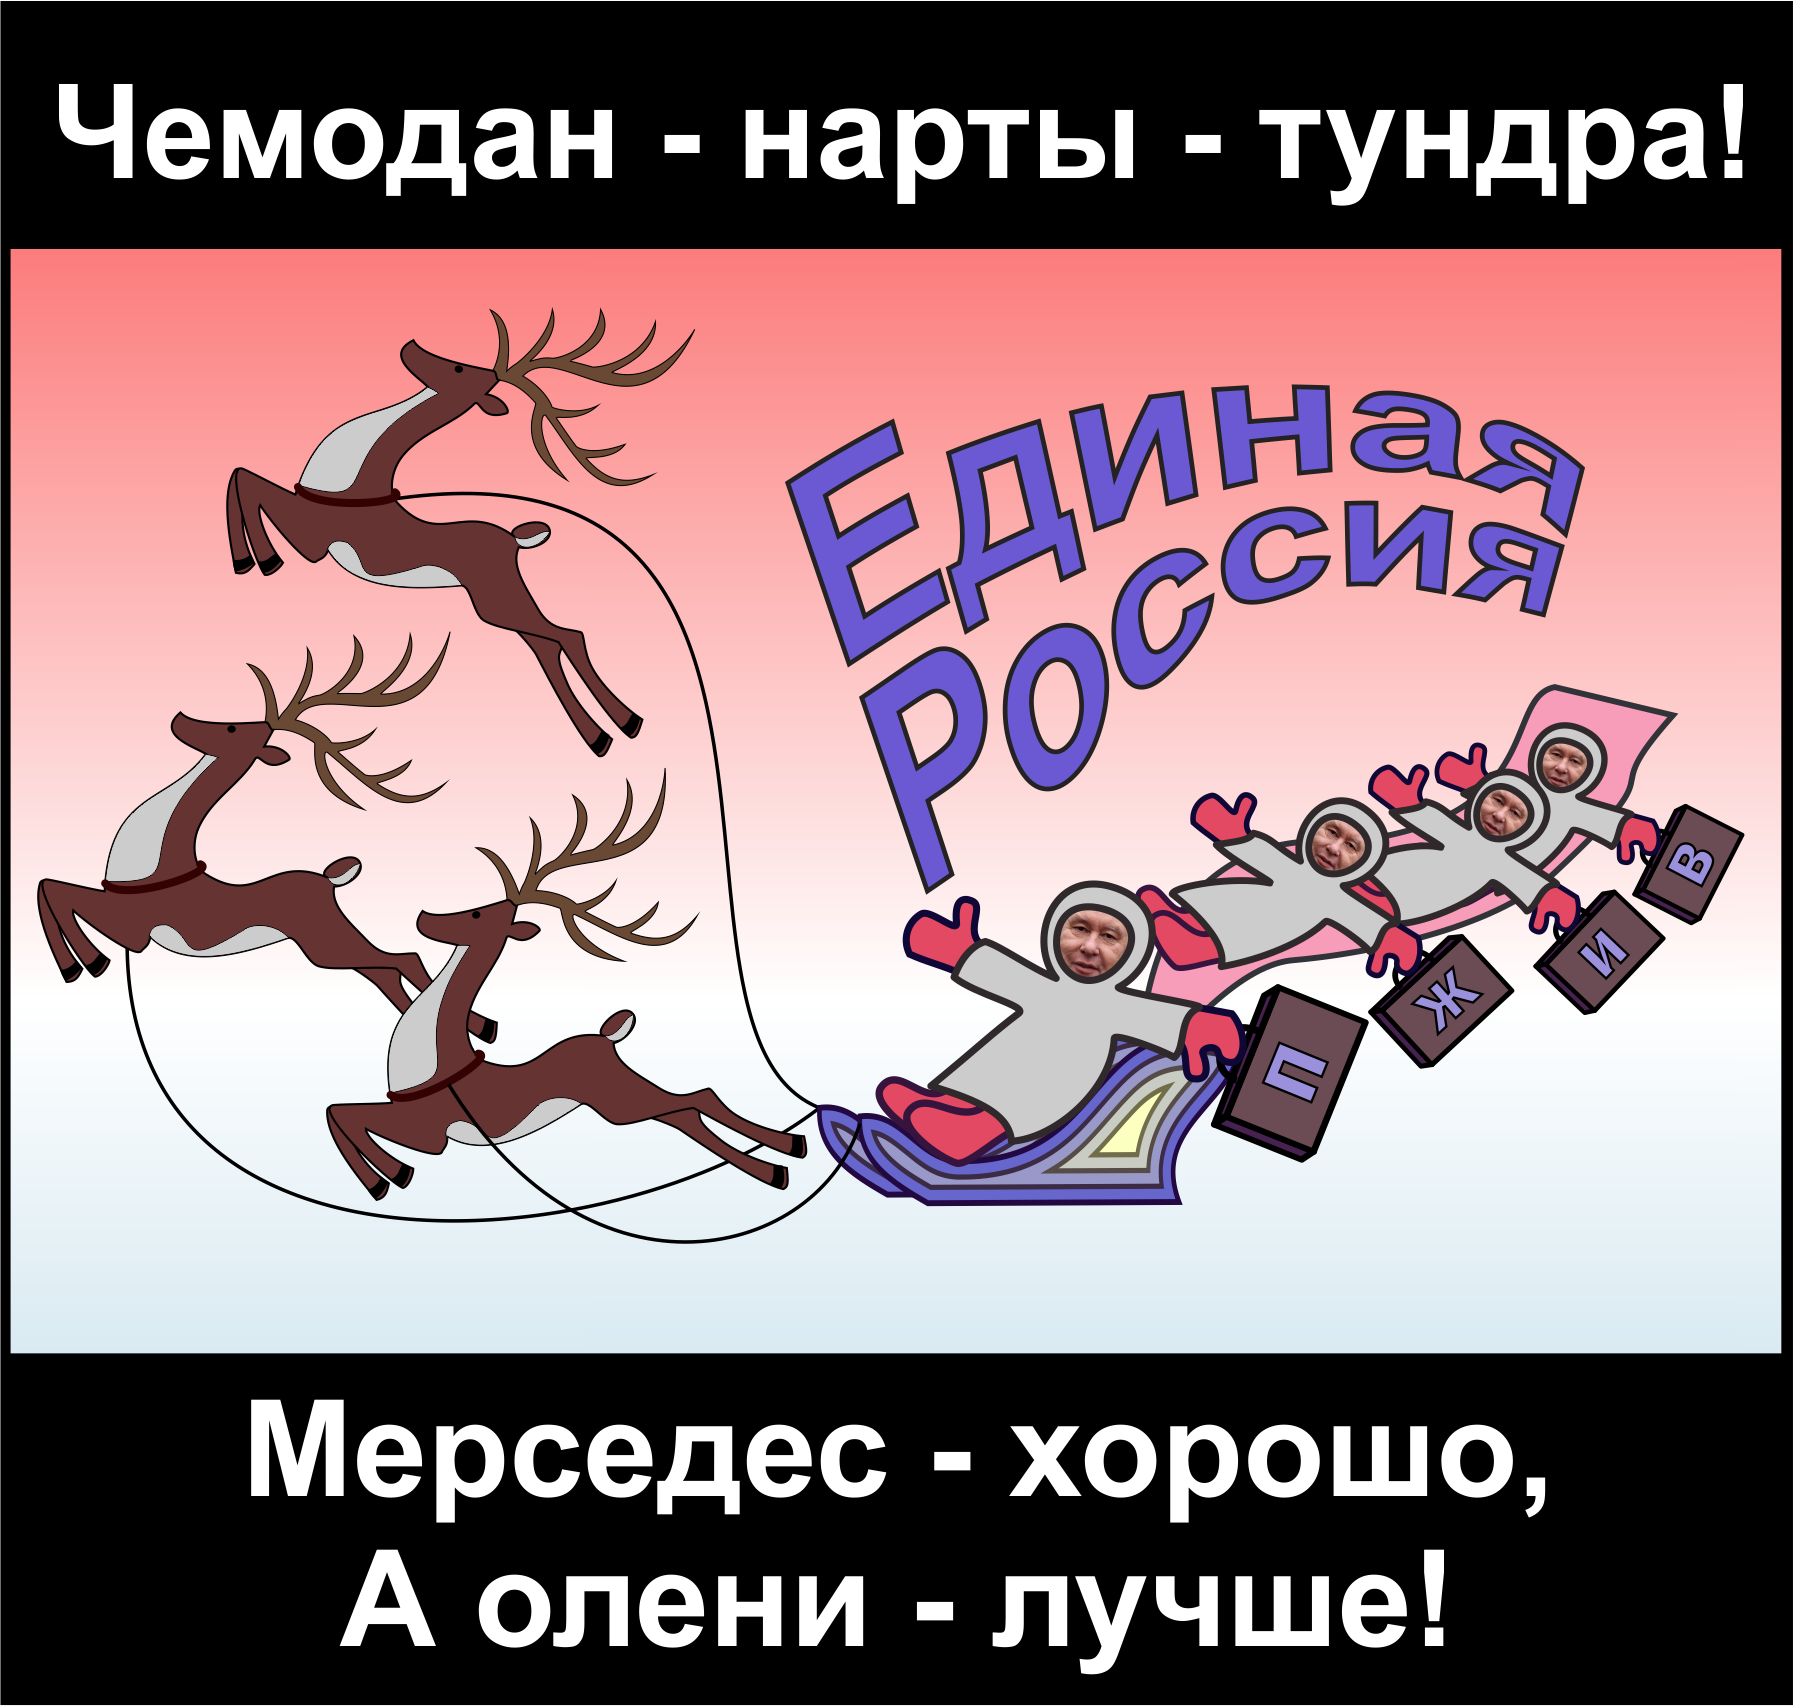 Suitcase - sled - tundra! - My, Elections, United Russia, Moscow City Duma, Self-nominated